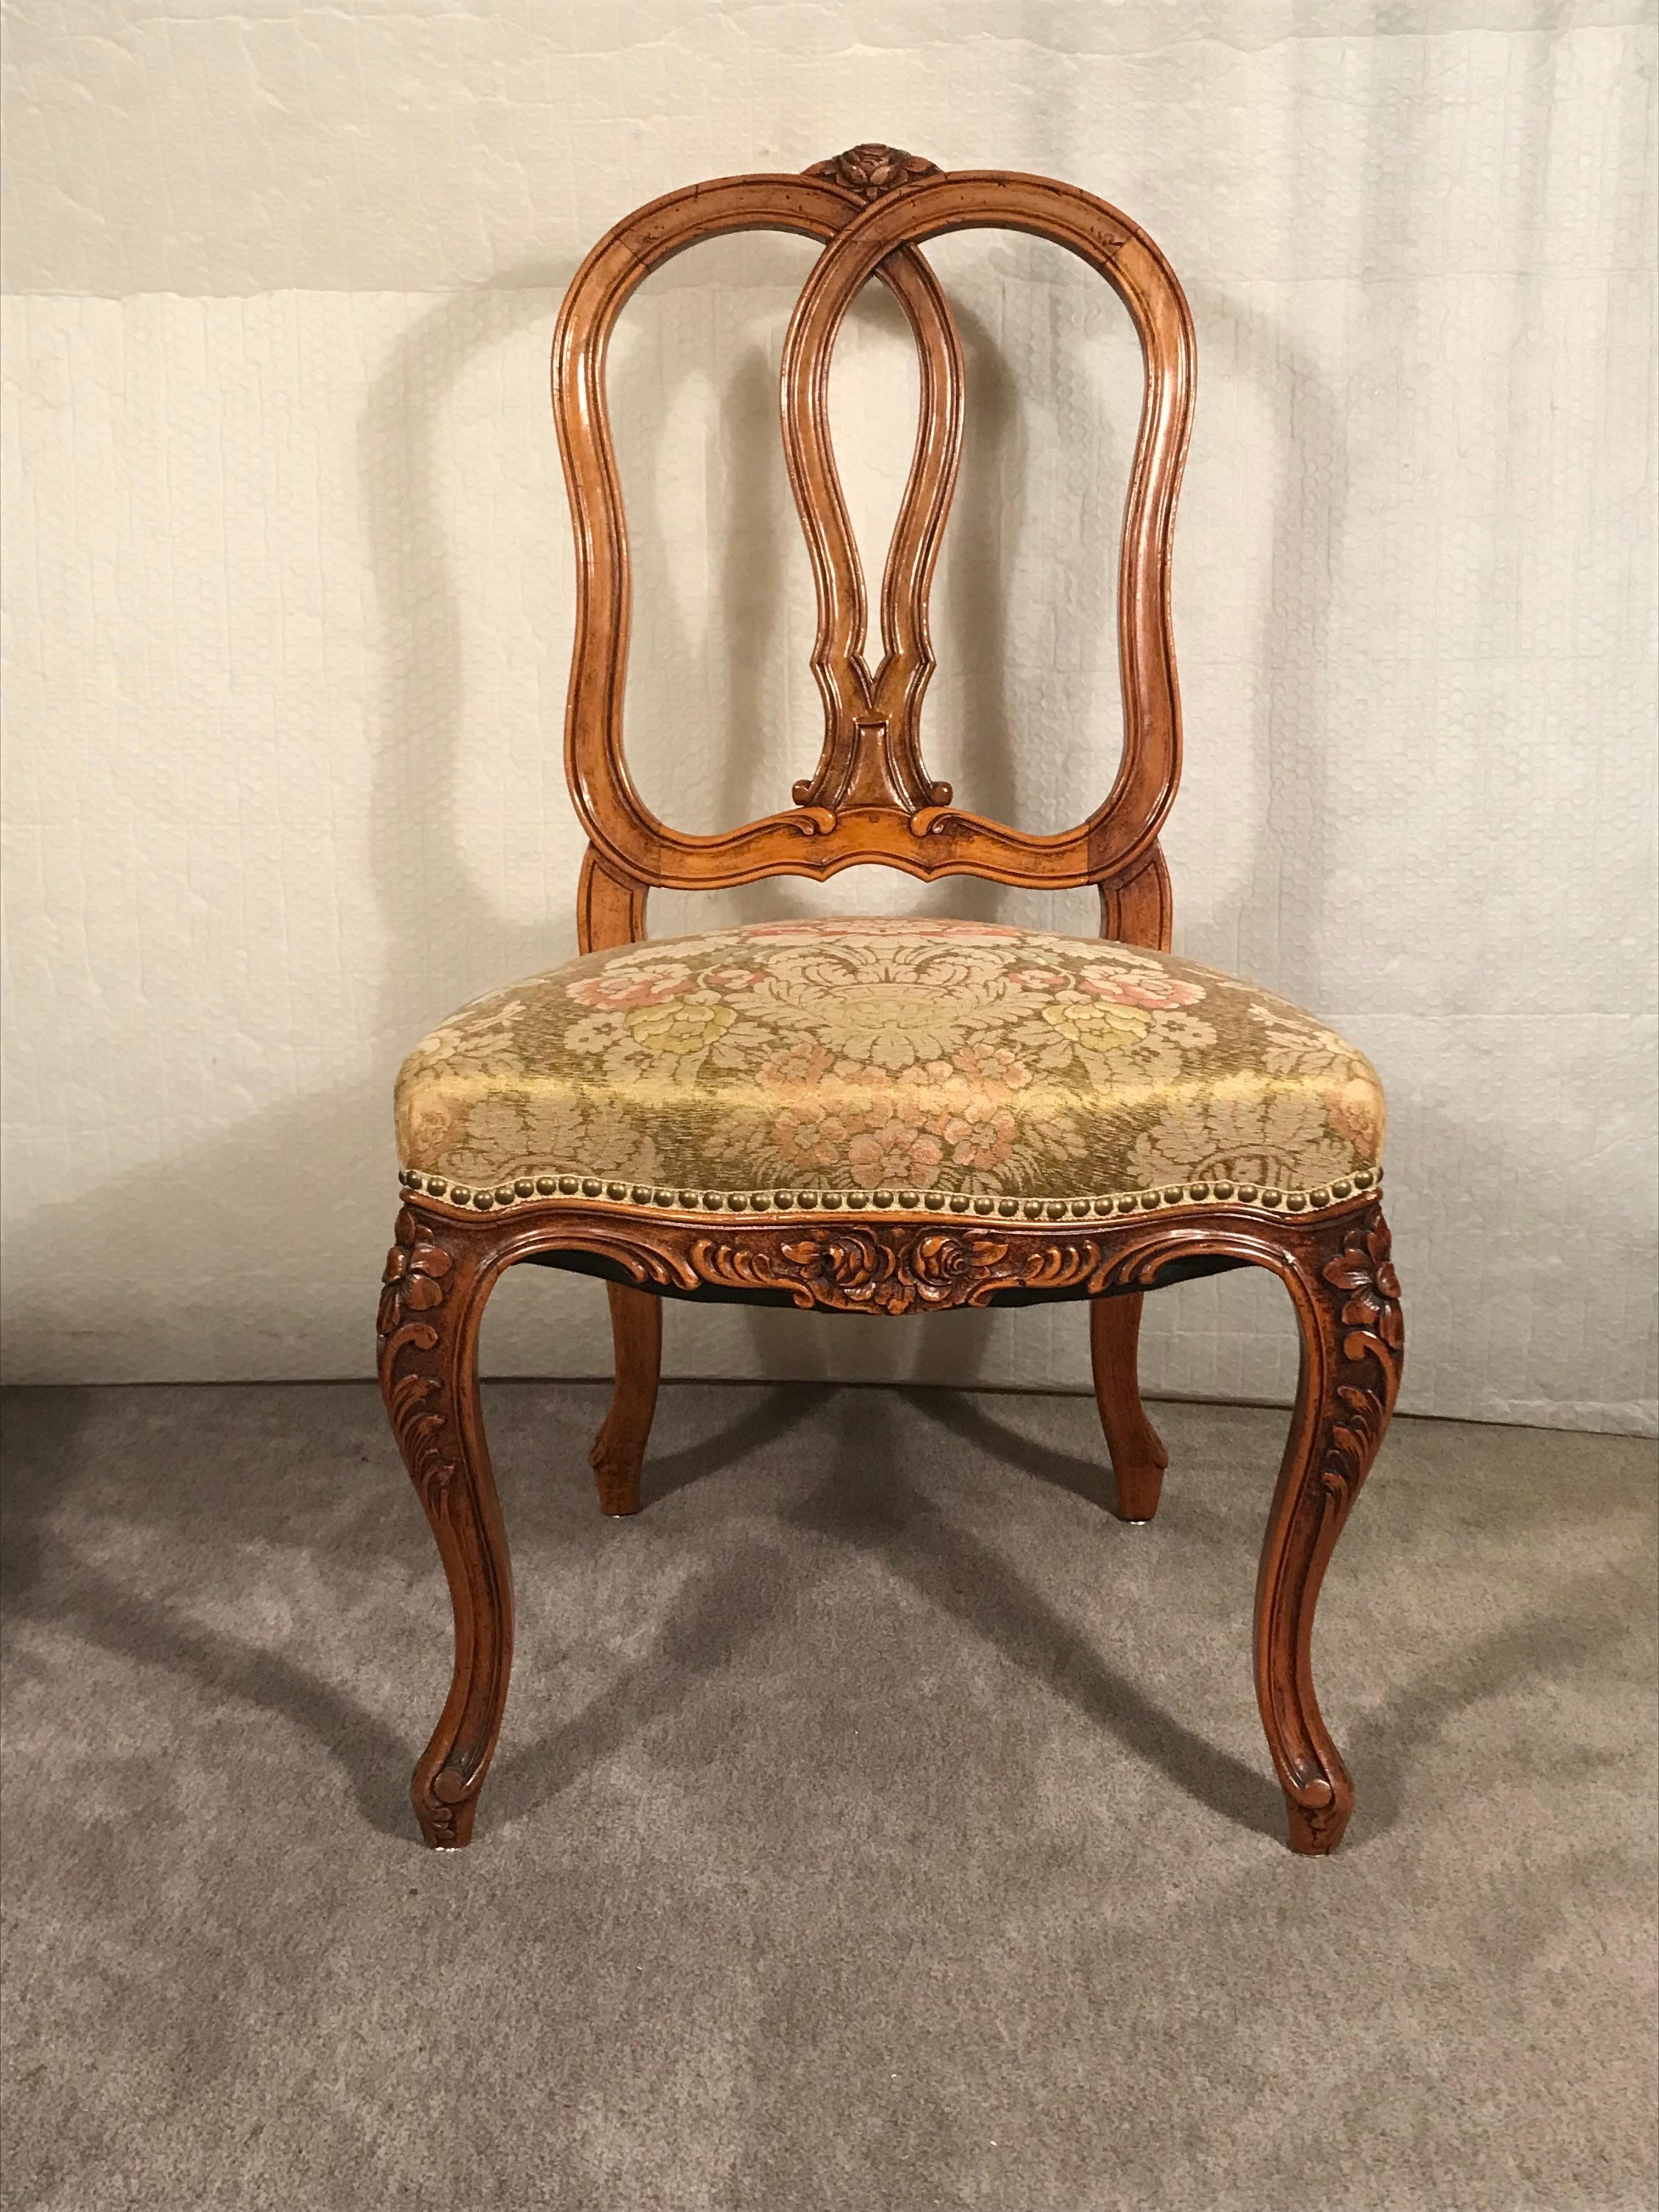 This set of four Baroque style chairs have a beautifully hand-carved flower and rocaille decor. The chairs date back to the 19th century and were made around 1860-70. They are in original condition and have been covered with a floral brocade fabric.